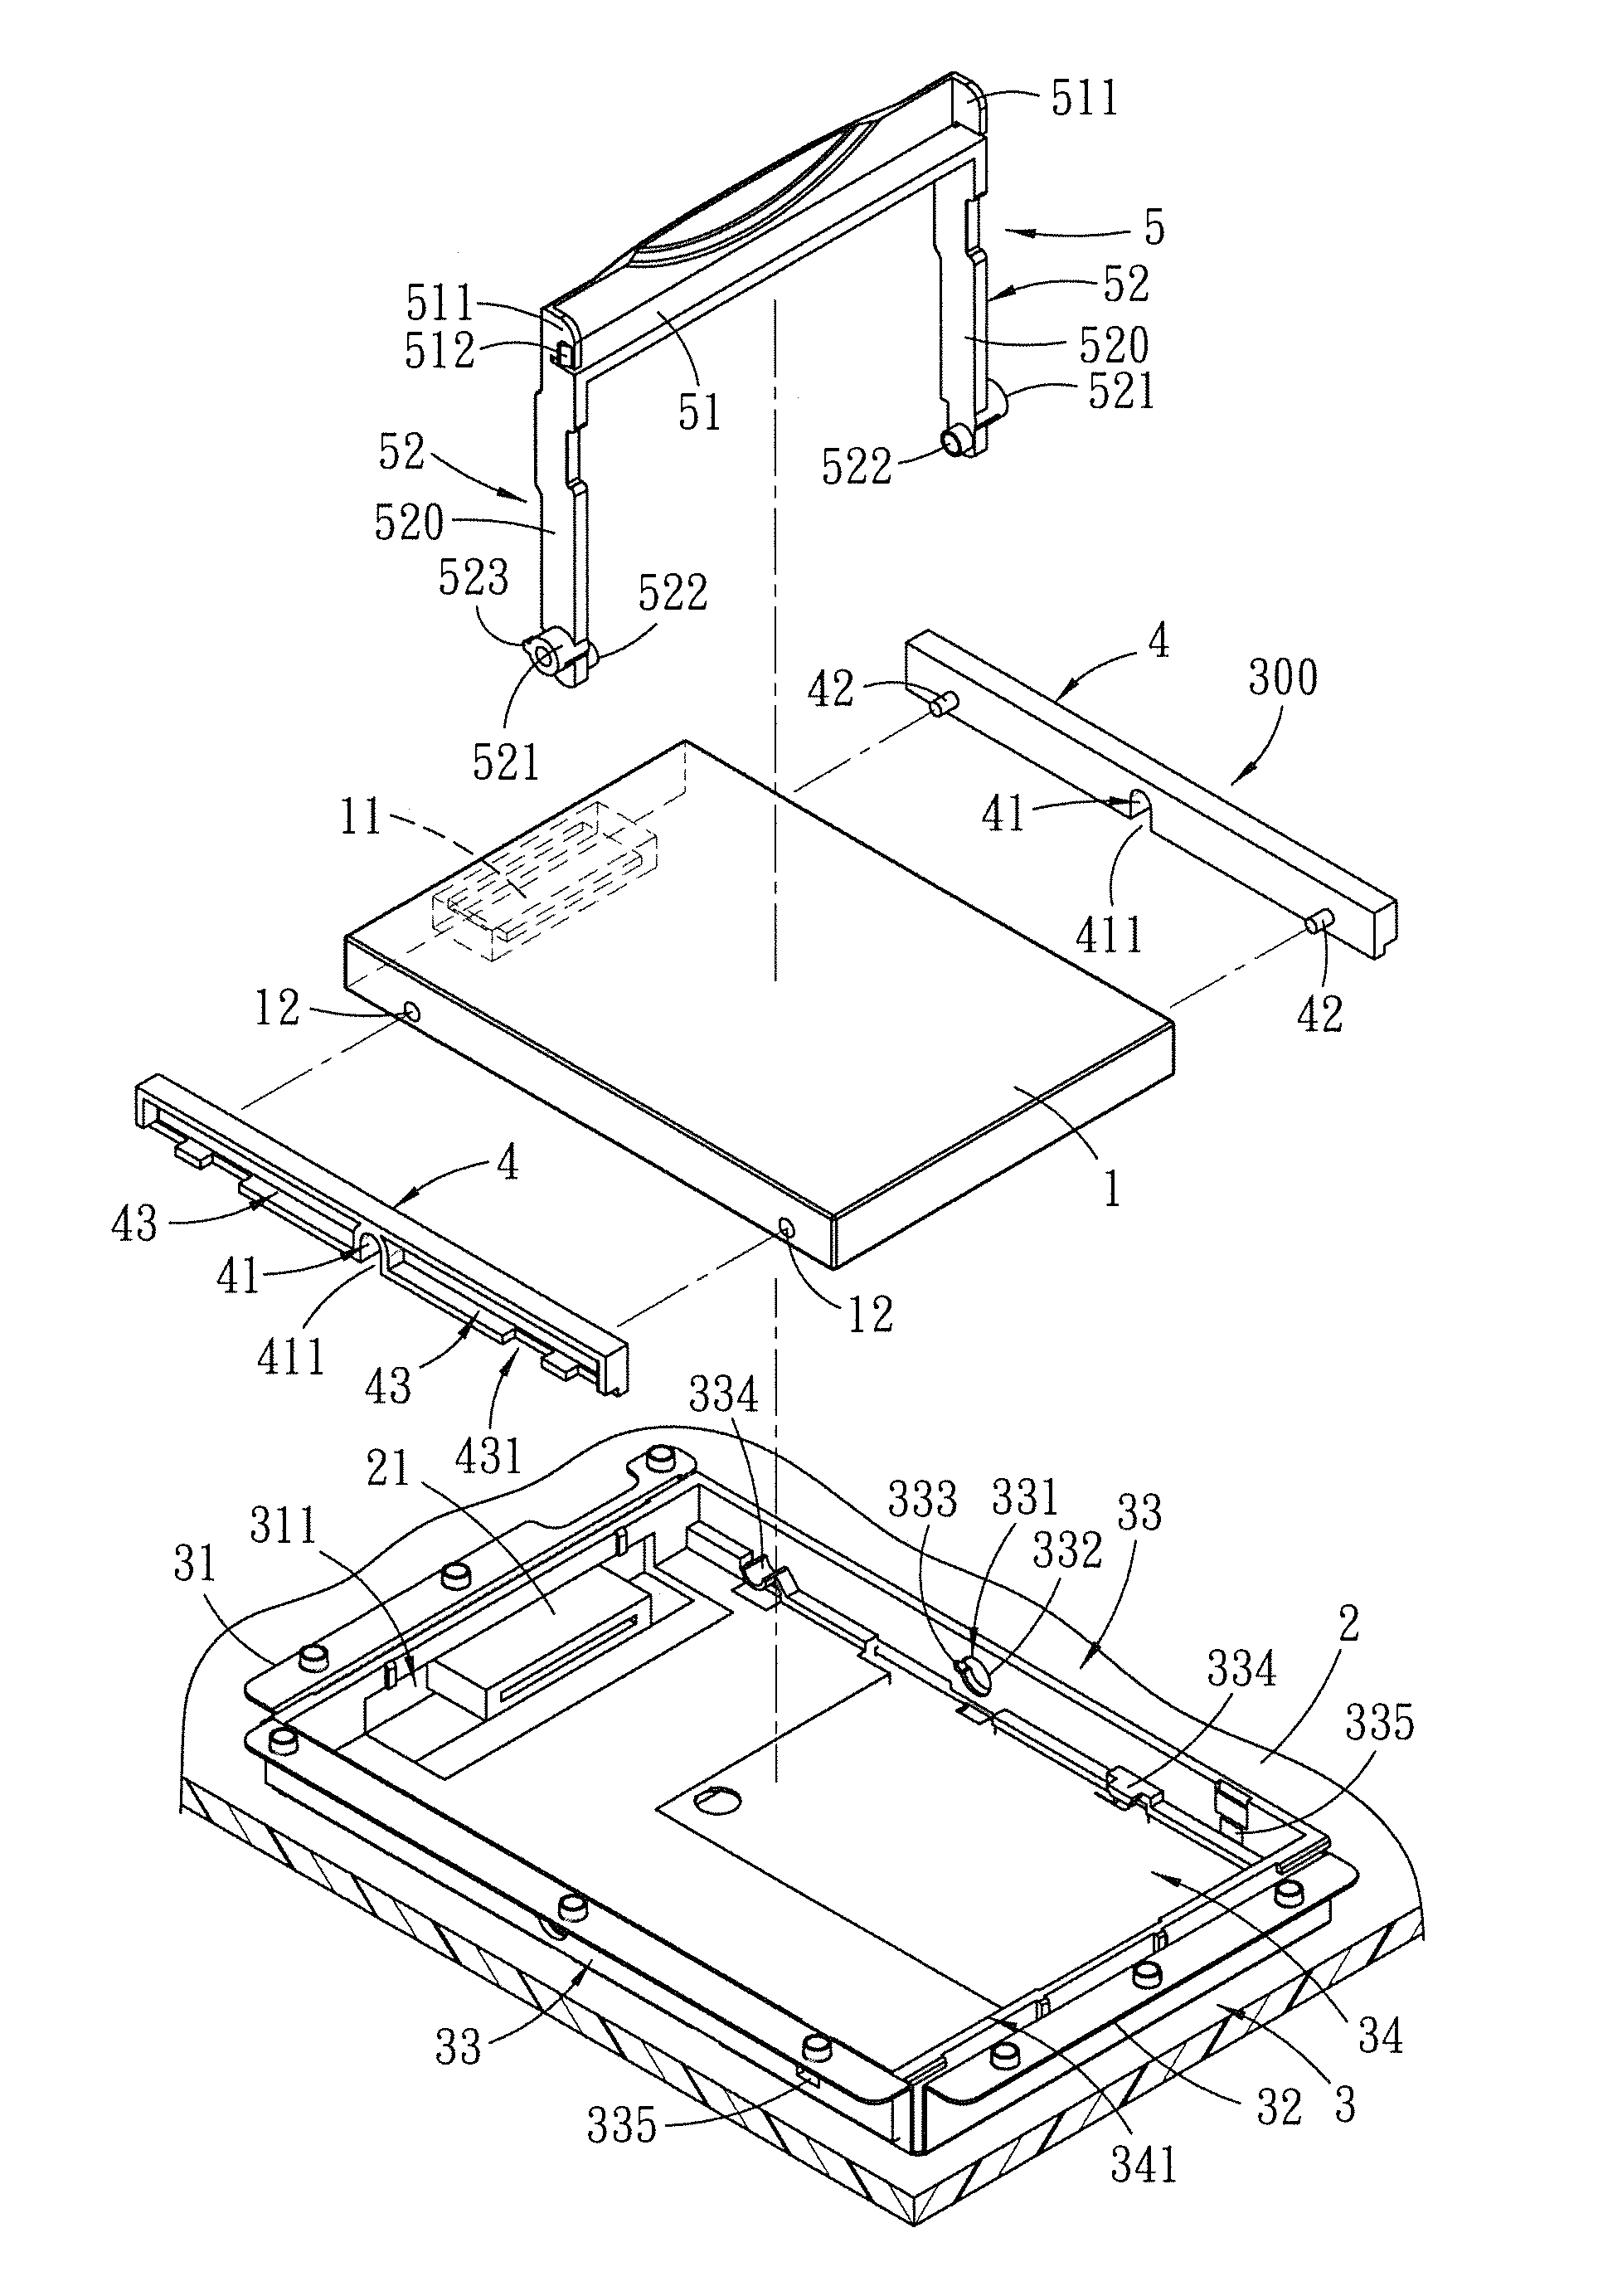 Plugging device